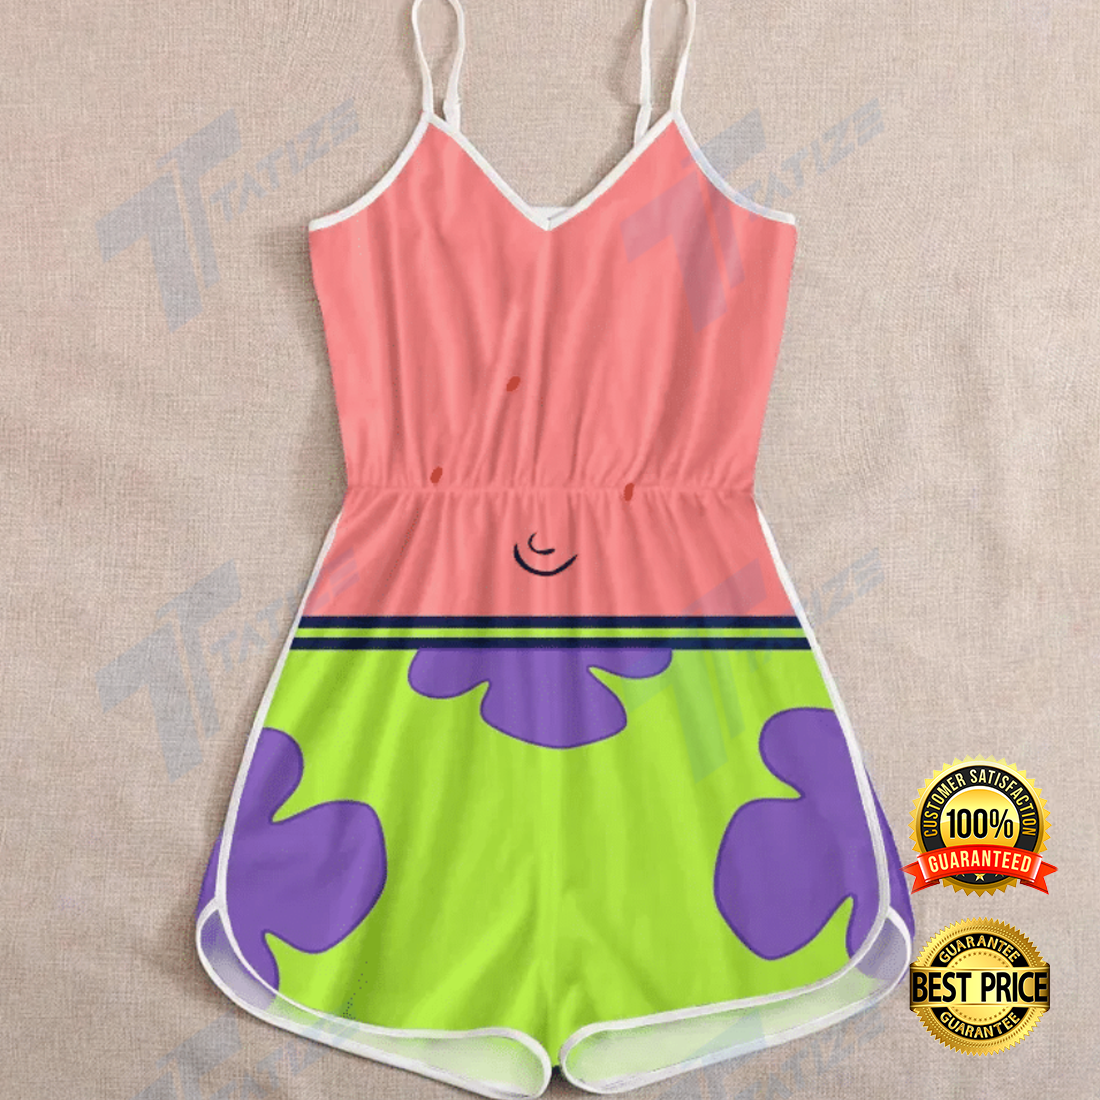 Patrick Star outfit romper 4